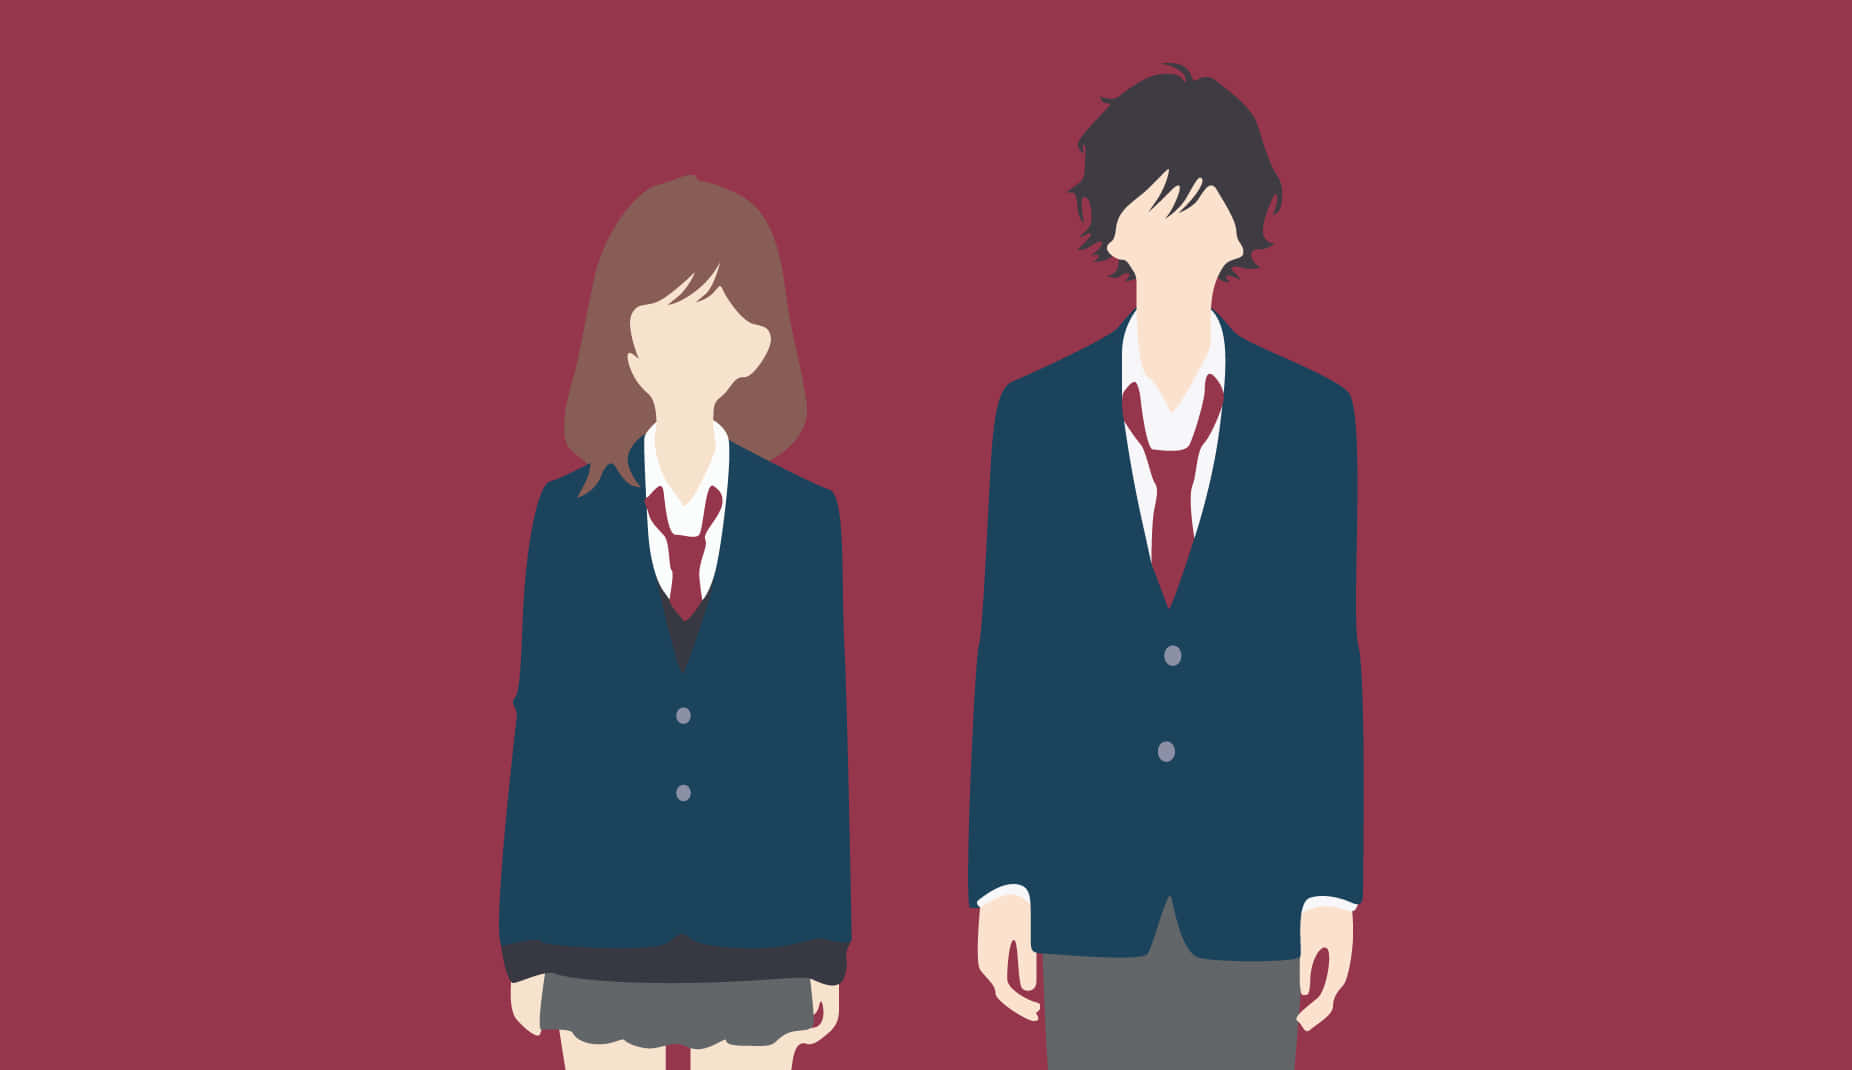 All of the characters of Ao Haru Ride, the Japanese manga series, stand together in friendship.